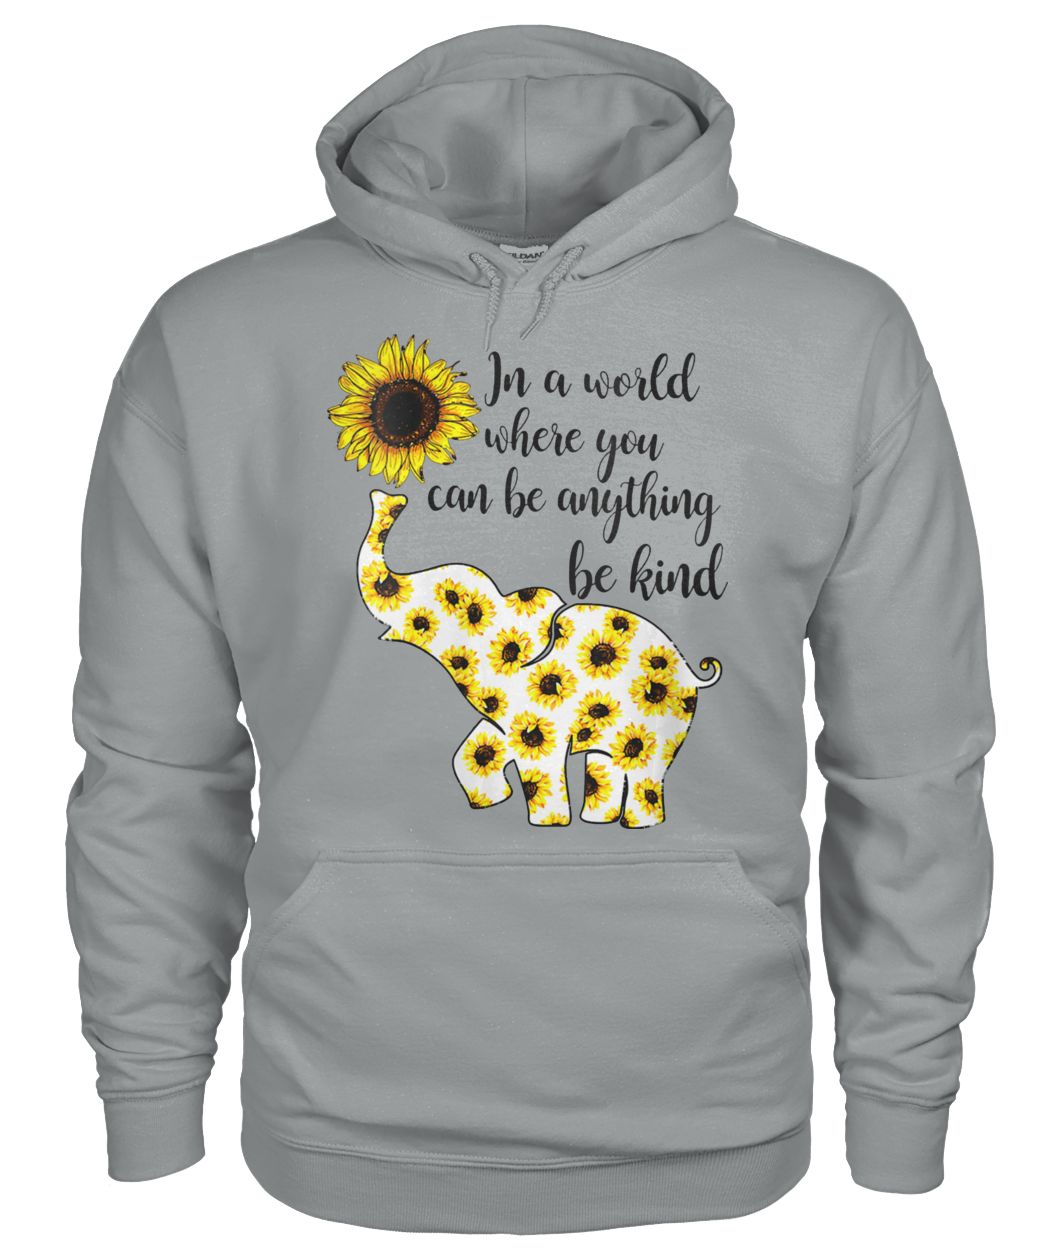 Sunflower elephant in a world where you can be anything be kind gildan hoodie